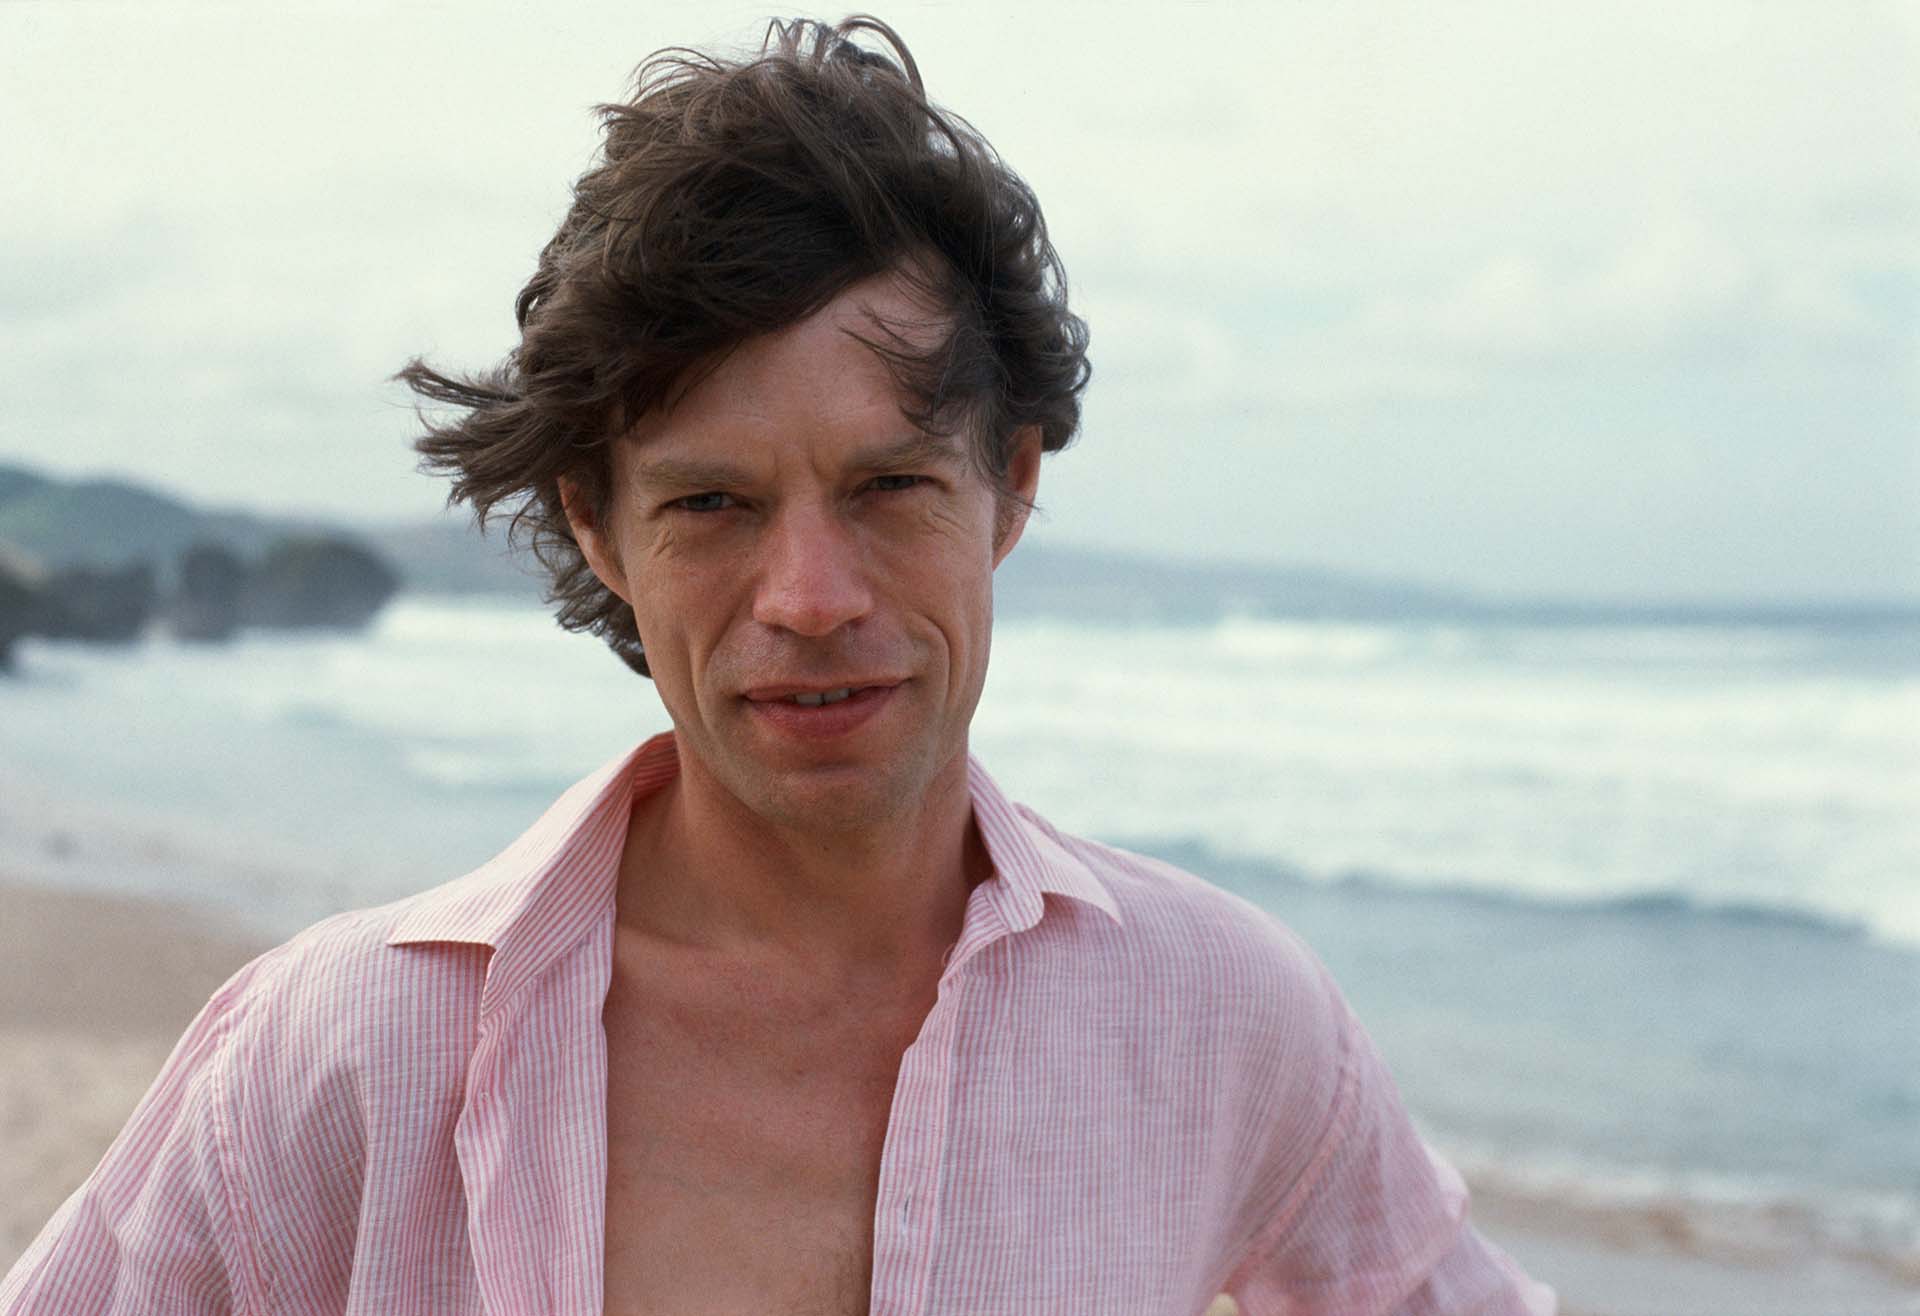 Mick Jagger on the beach at Barbados, just prior to his 40th birthday. (Photo by © Wally McNamee/CORBIS/Corbis via Getty Images)